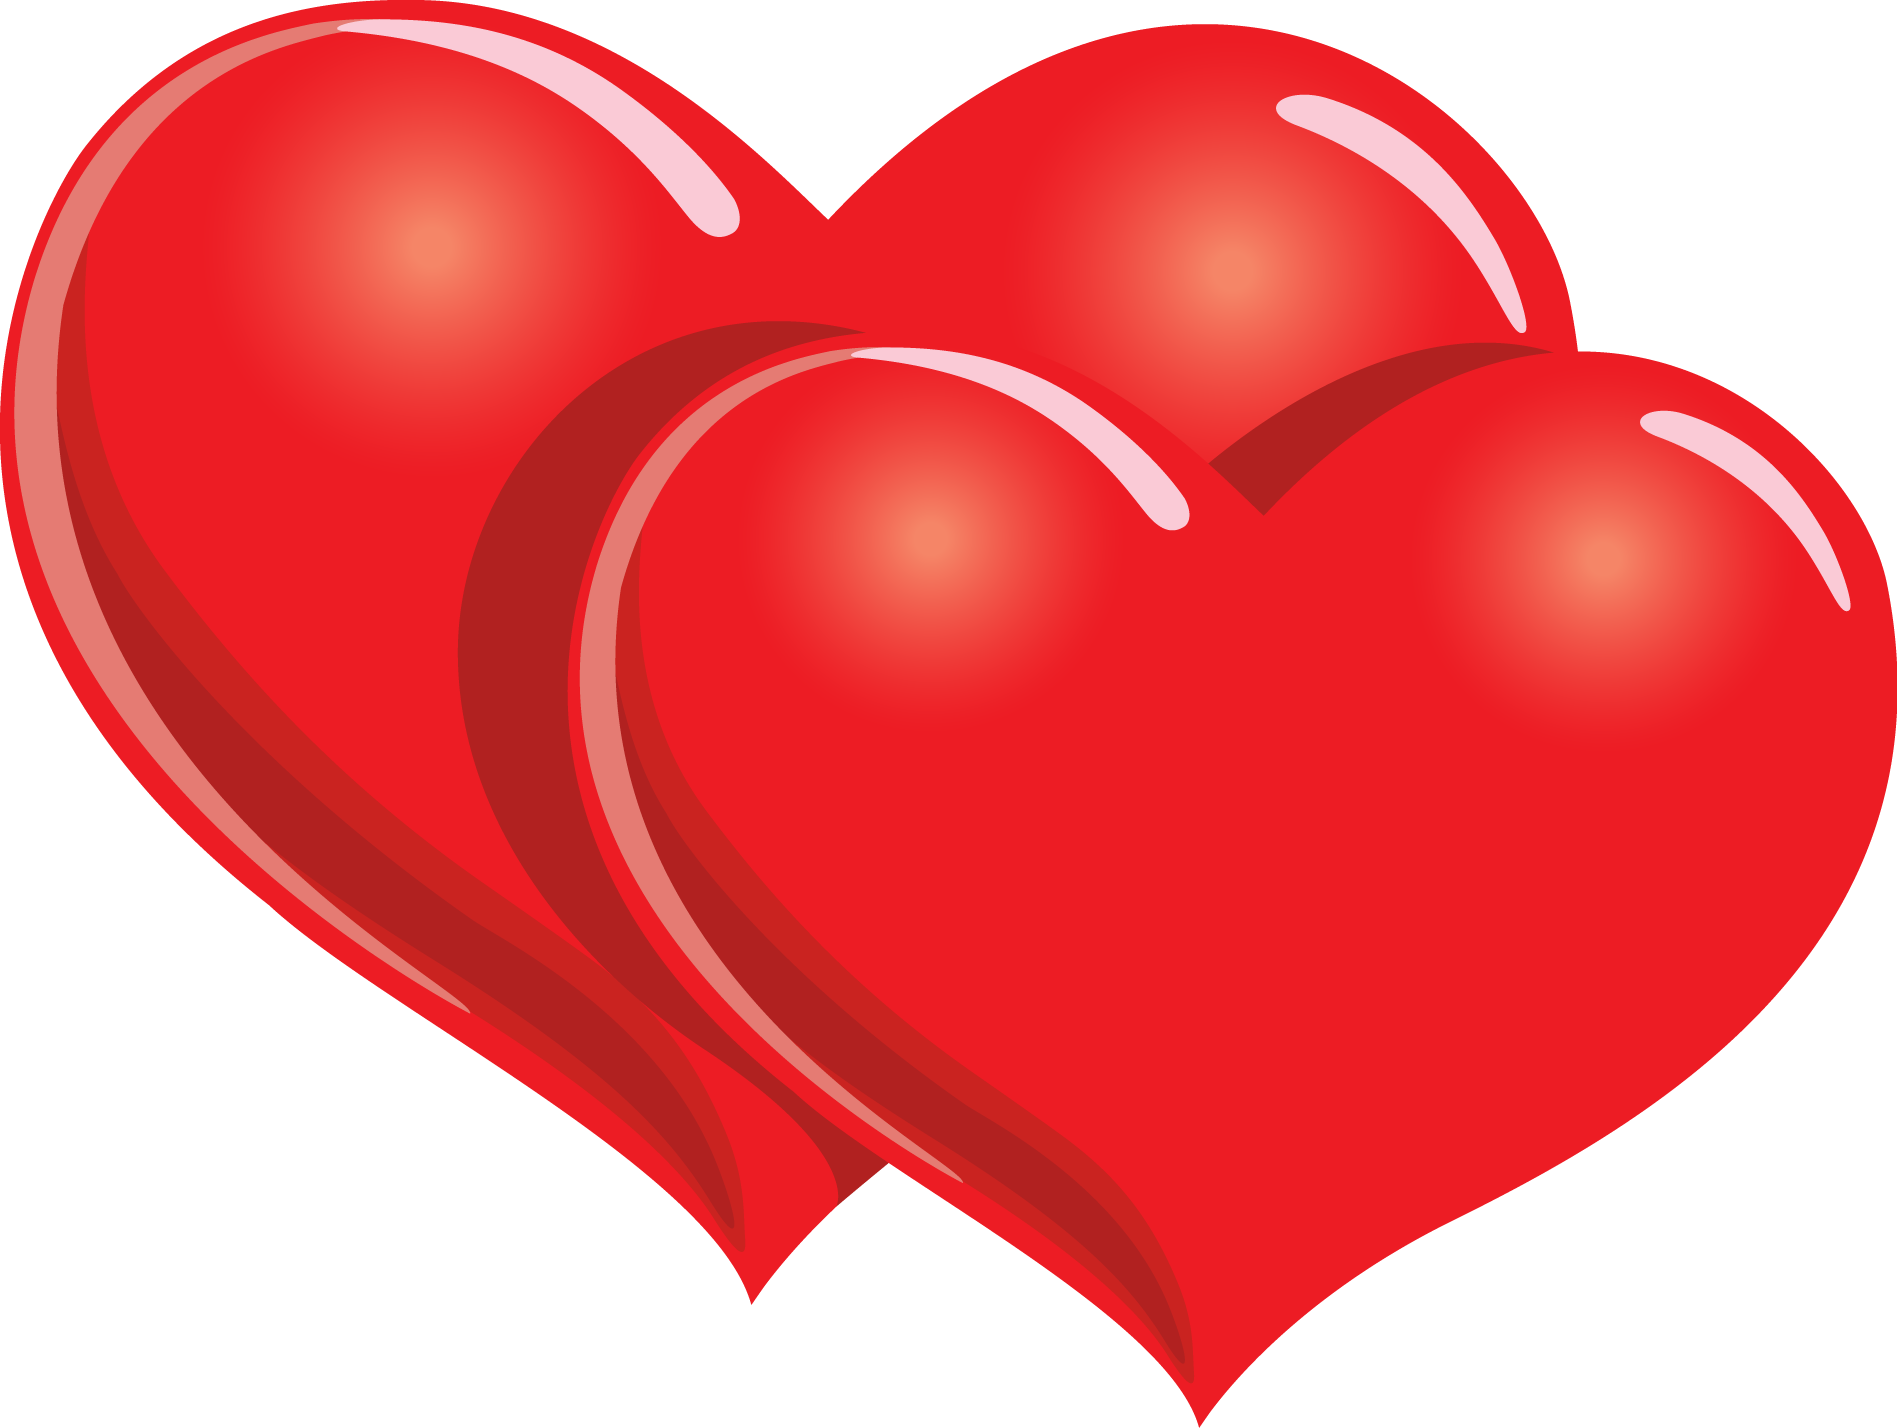 valentine heart clipart images - photo #44